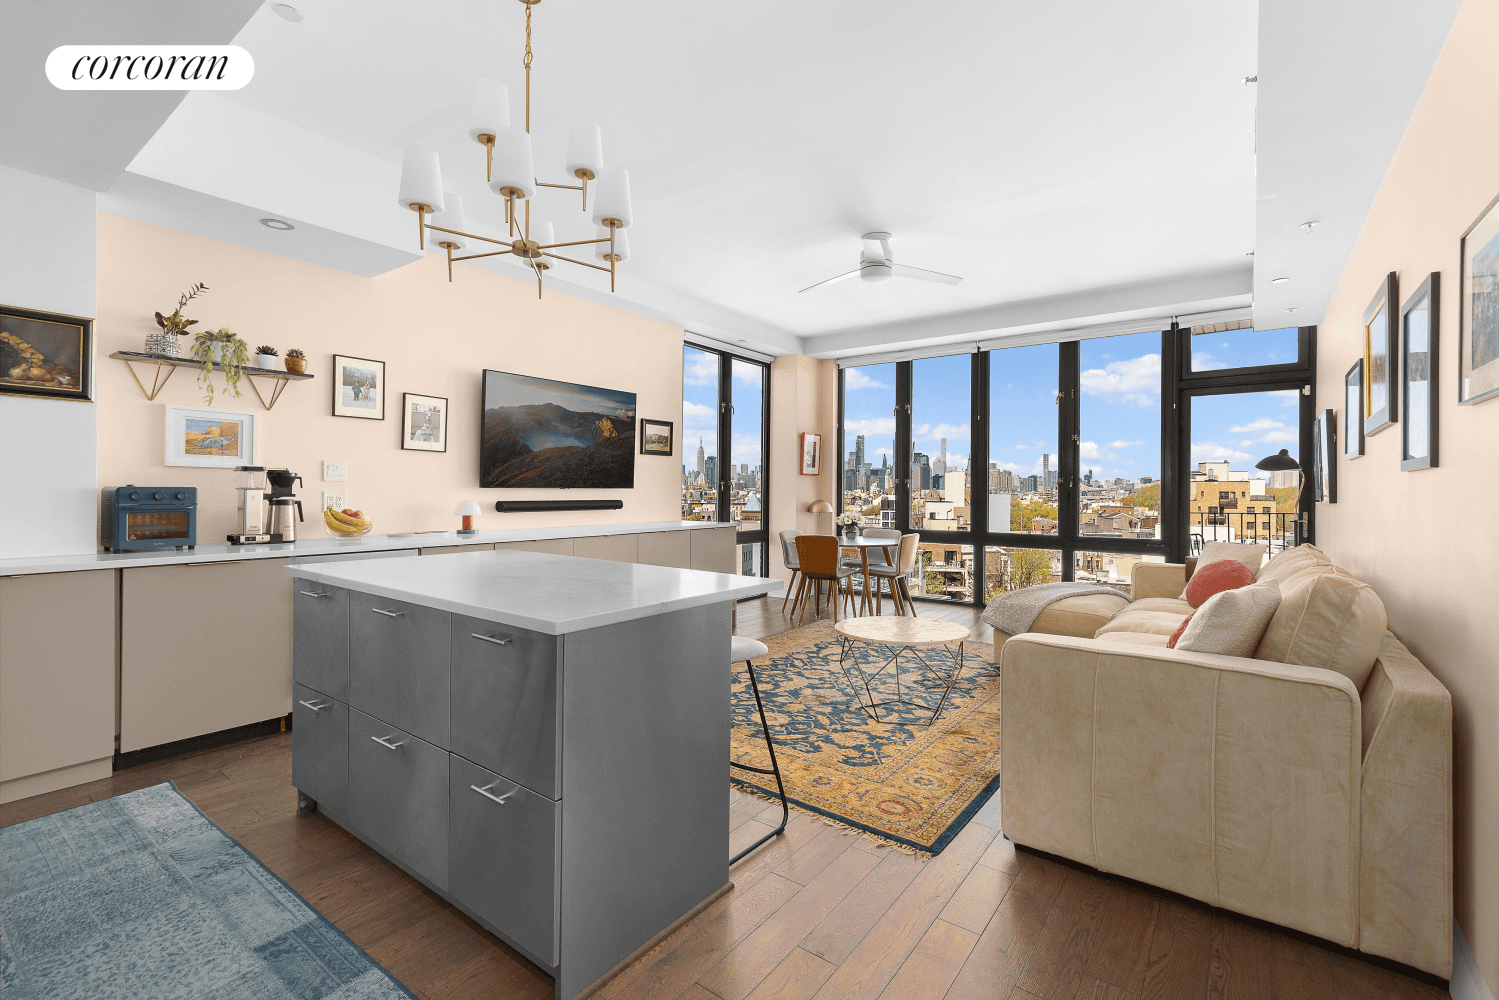 Welcome home to apartment 6 at 214 Richardson, a two bedroom, two bathroom home with two private outdoor spaces and endless views of the Manhattan amp ; Brooklyn skyline !